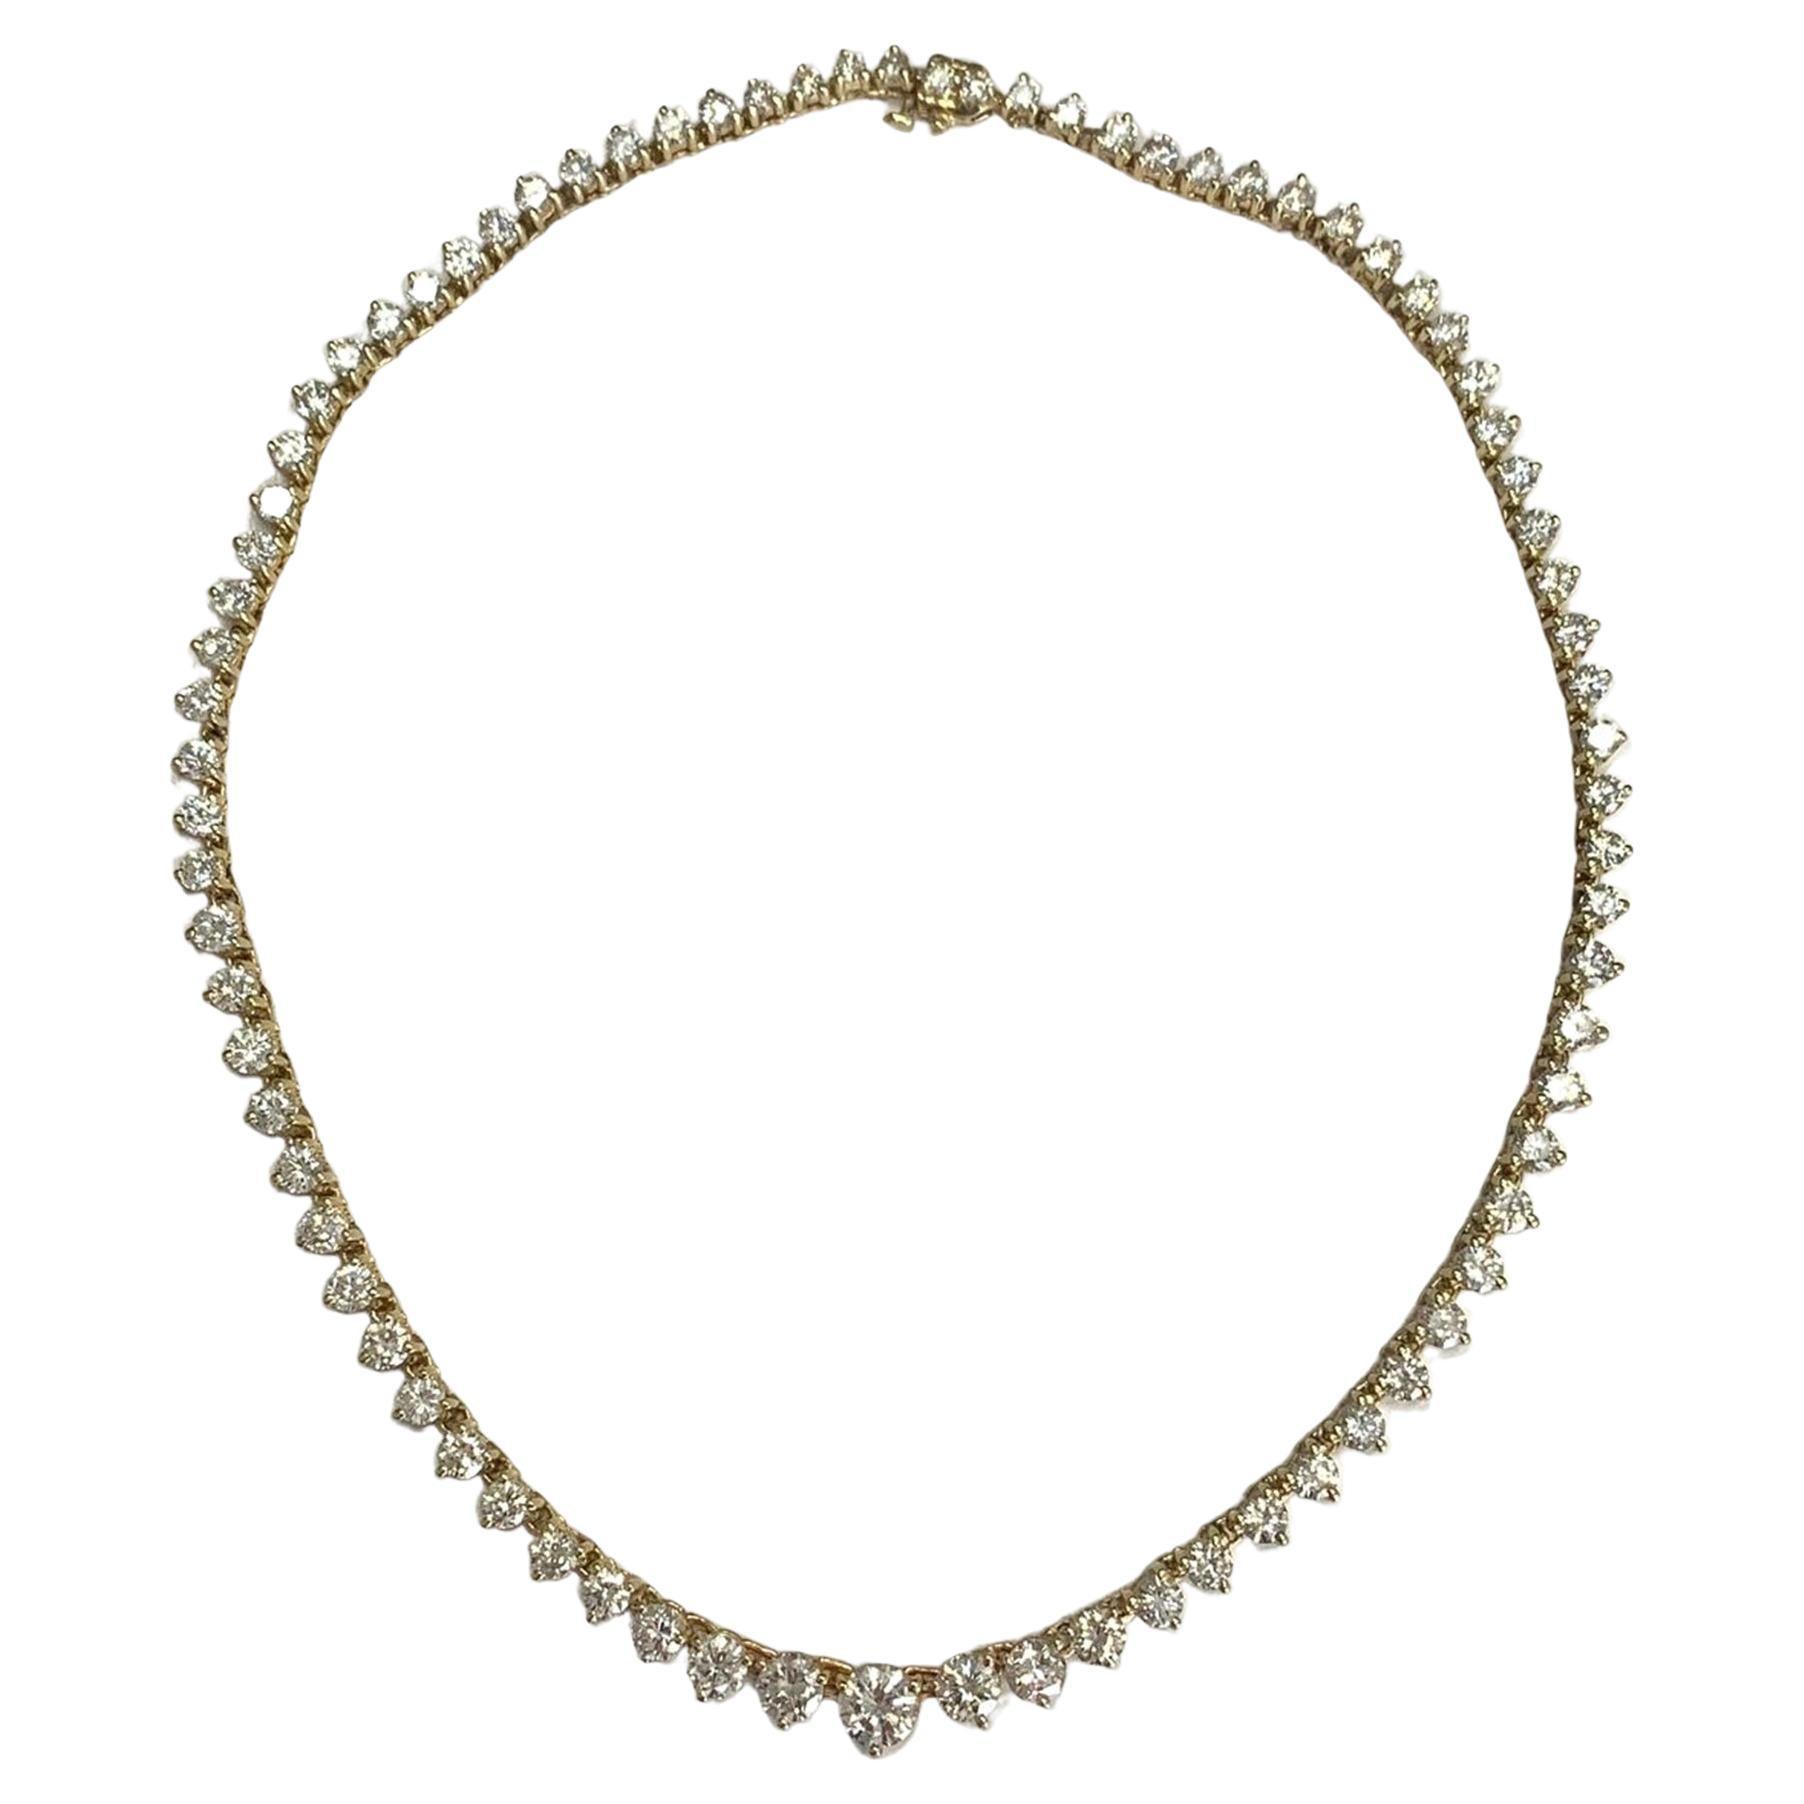 15.45 cttw. Graduated Tennis Necklace in 14K Yellow Gold
Material: 14k Yellow Gold Style: Graduated Stone: White Diamond Shape: Round White Diamonds Weight: 15.45 cttw Colour: G Clarity: SI1 Weight: 23.10g. Lenth: 15 inch.